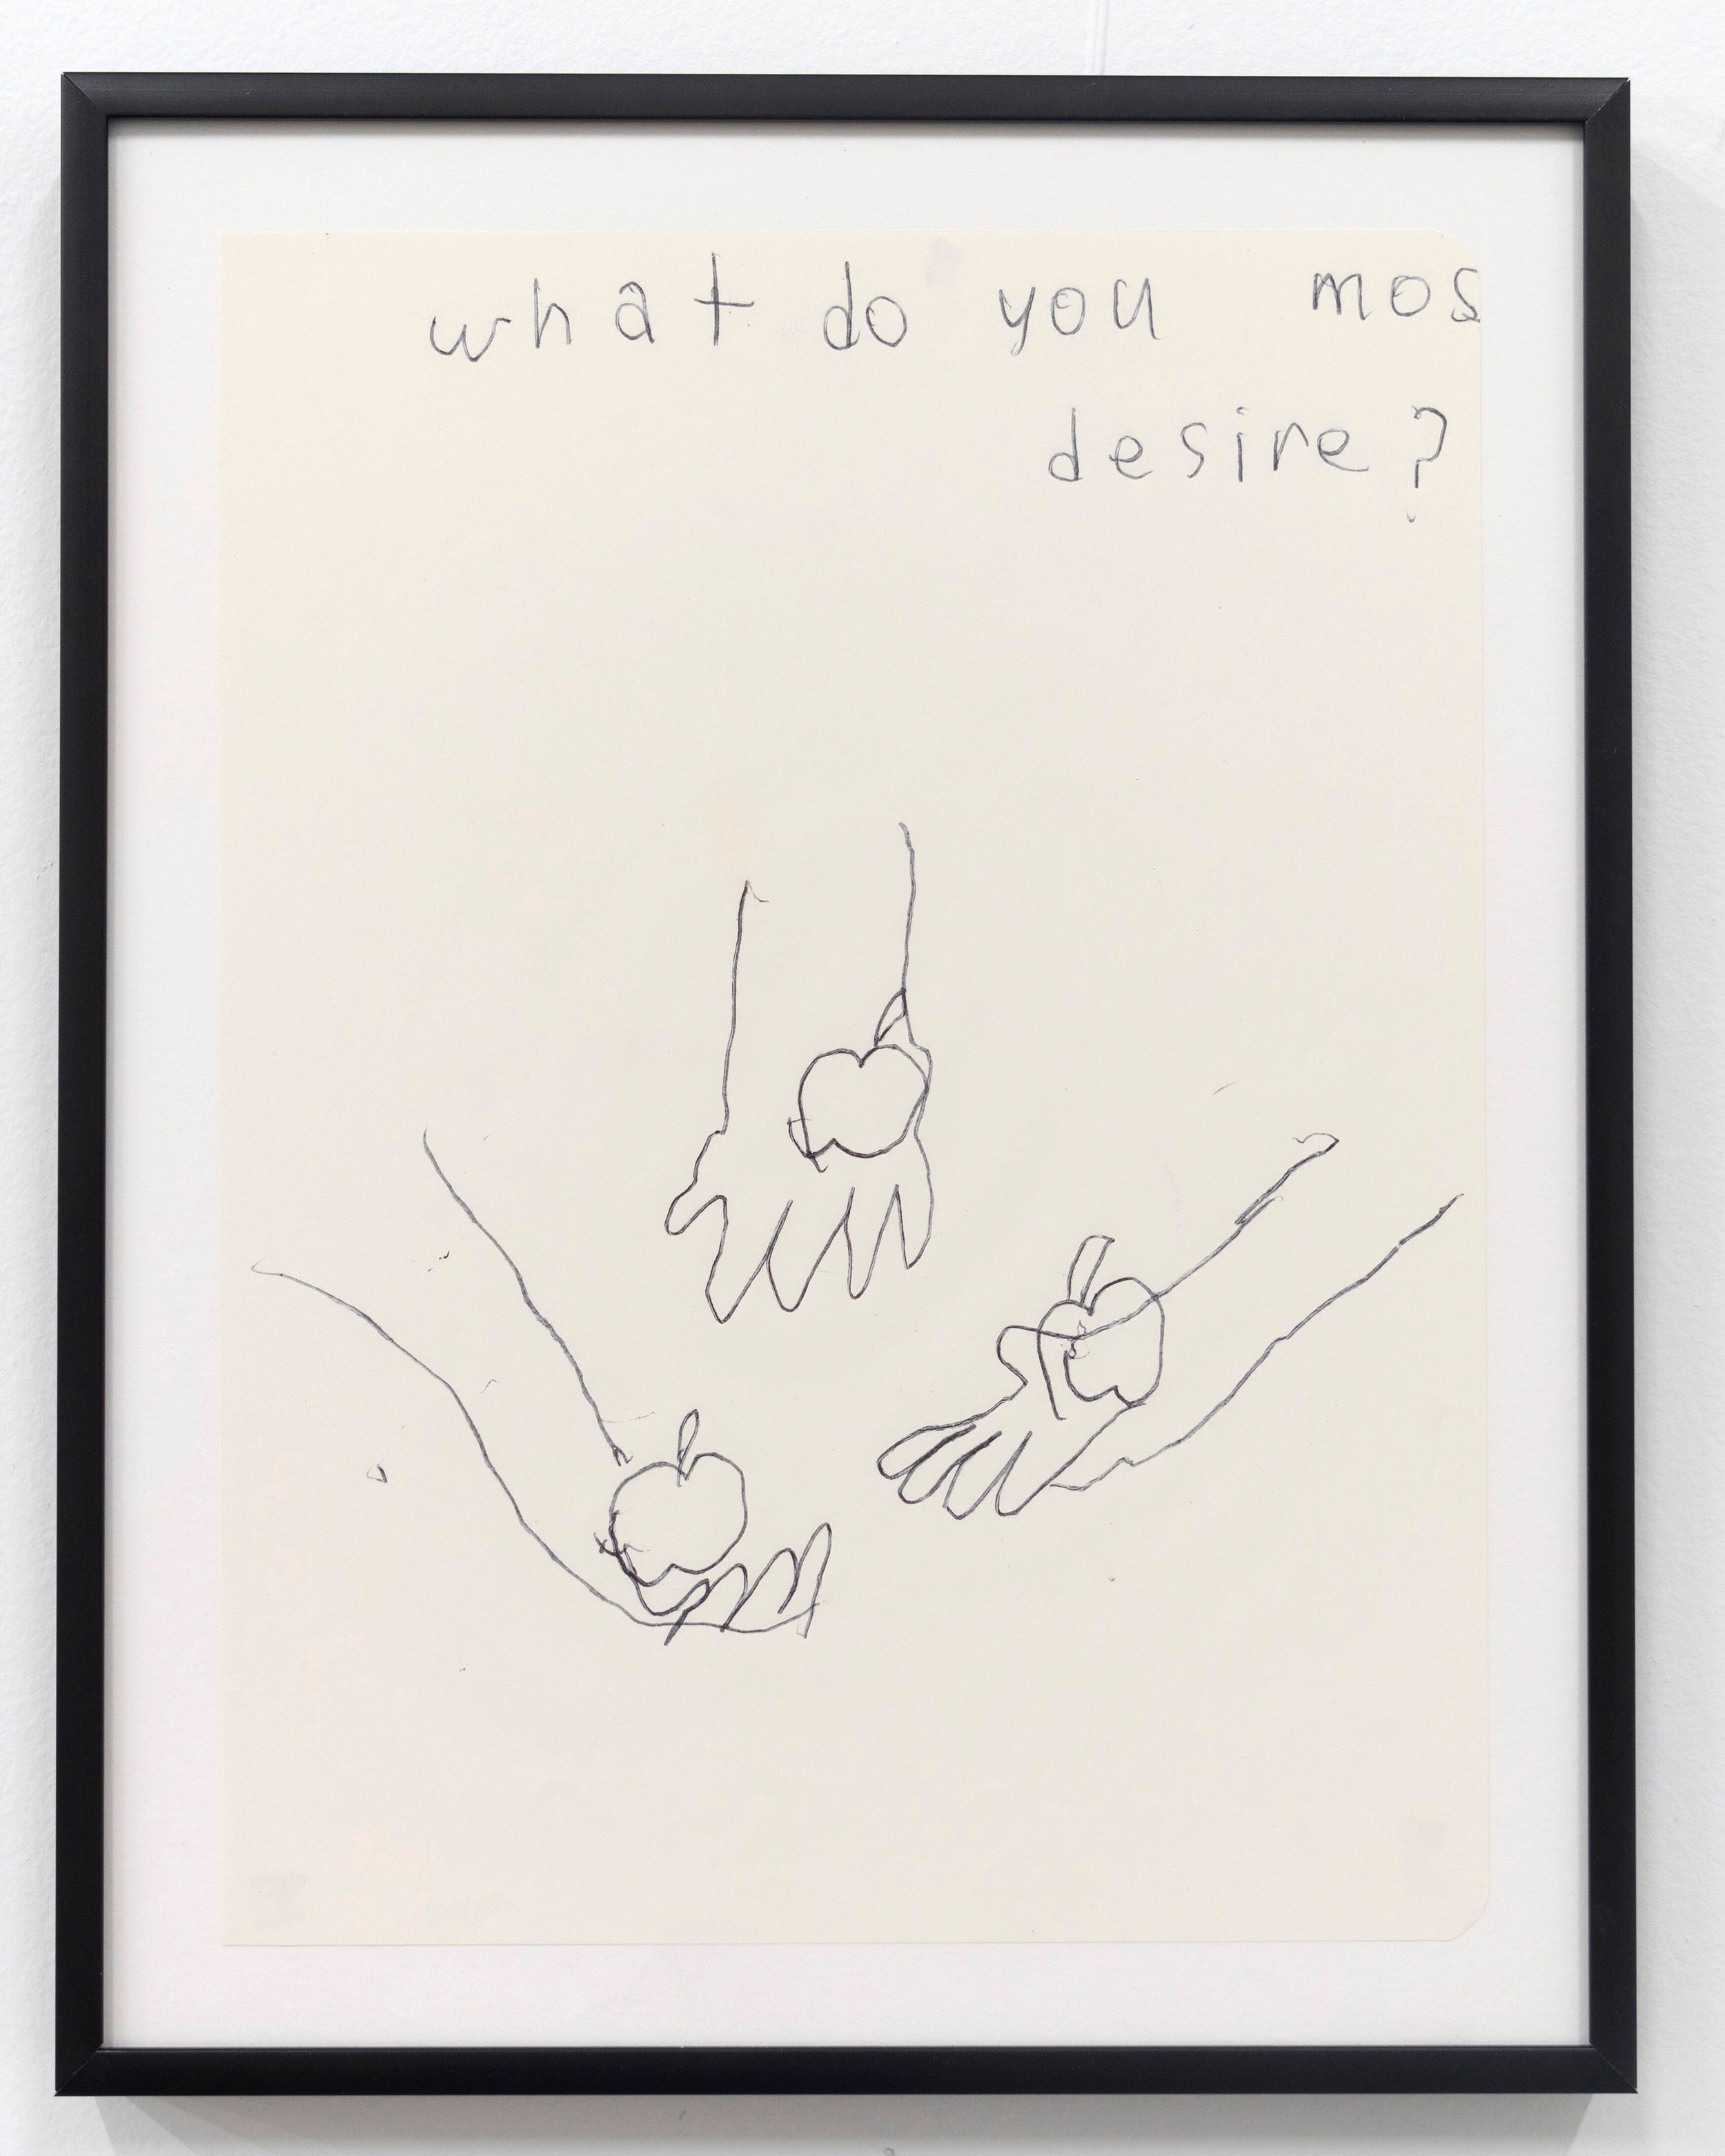   Emilie Gossiaux    What Do You Most Desire , 2018 Ink on newsprint   11 1/2 x 9 1/8 inches 29.2 x 23.2 cm  